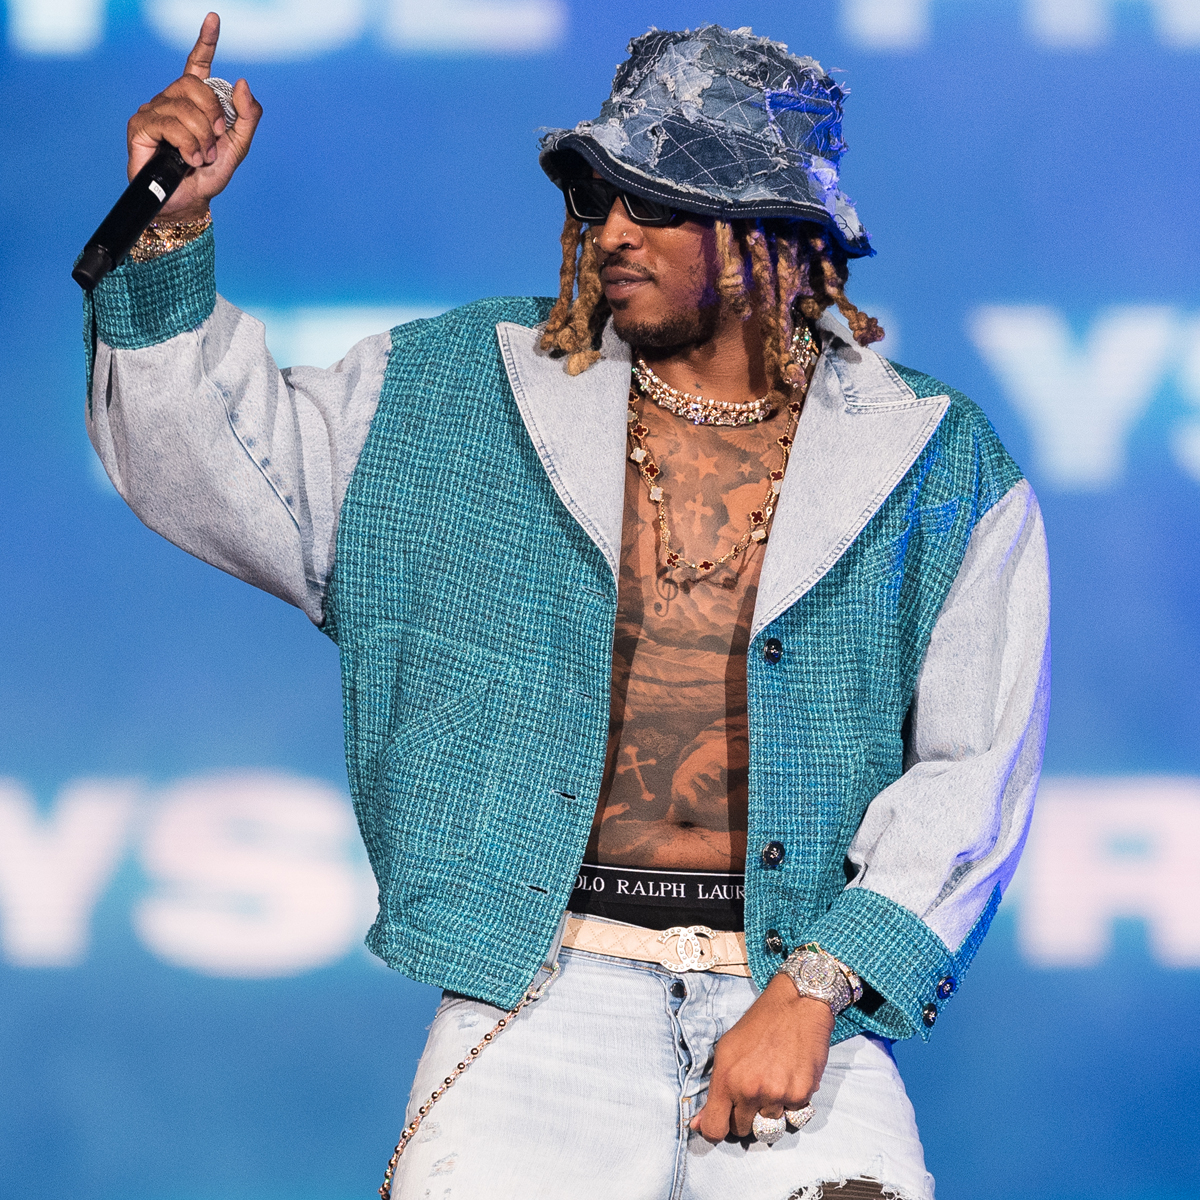 Future Explains How His “Rock Star Lifestyle” Affects His Parenting